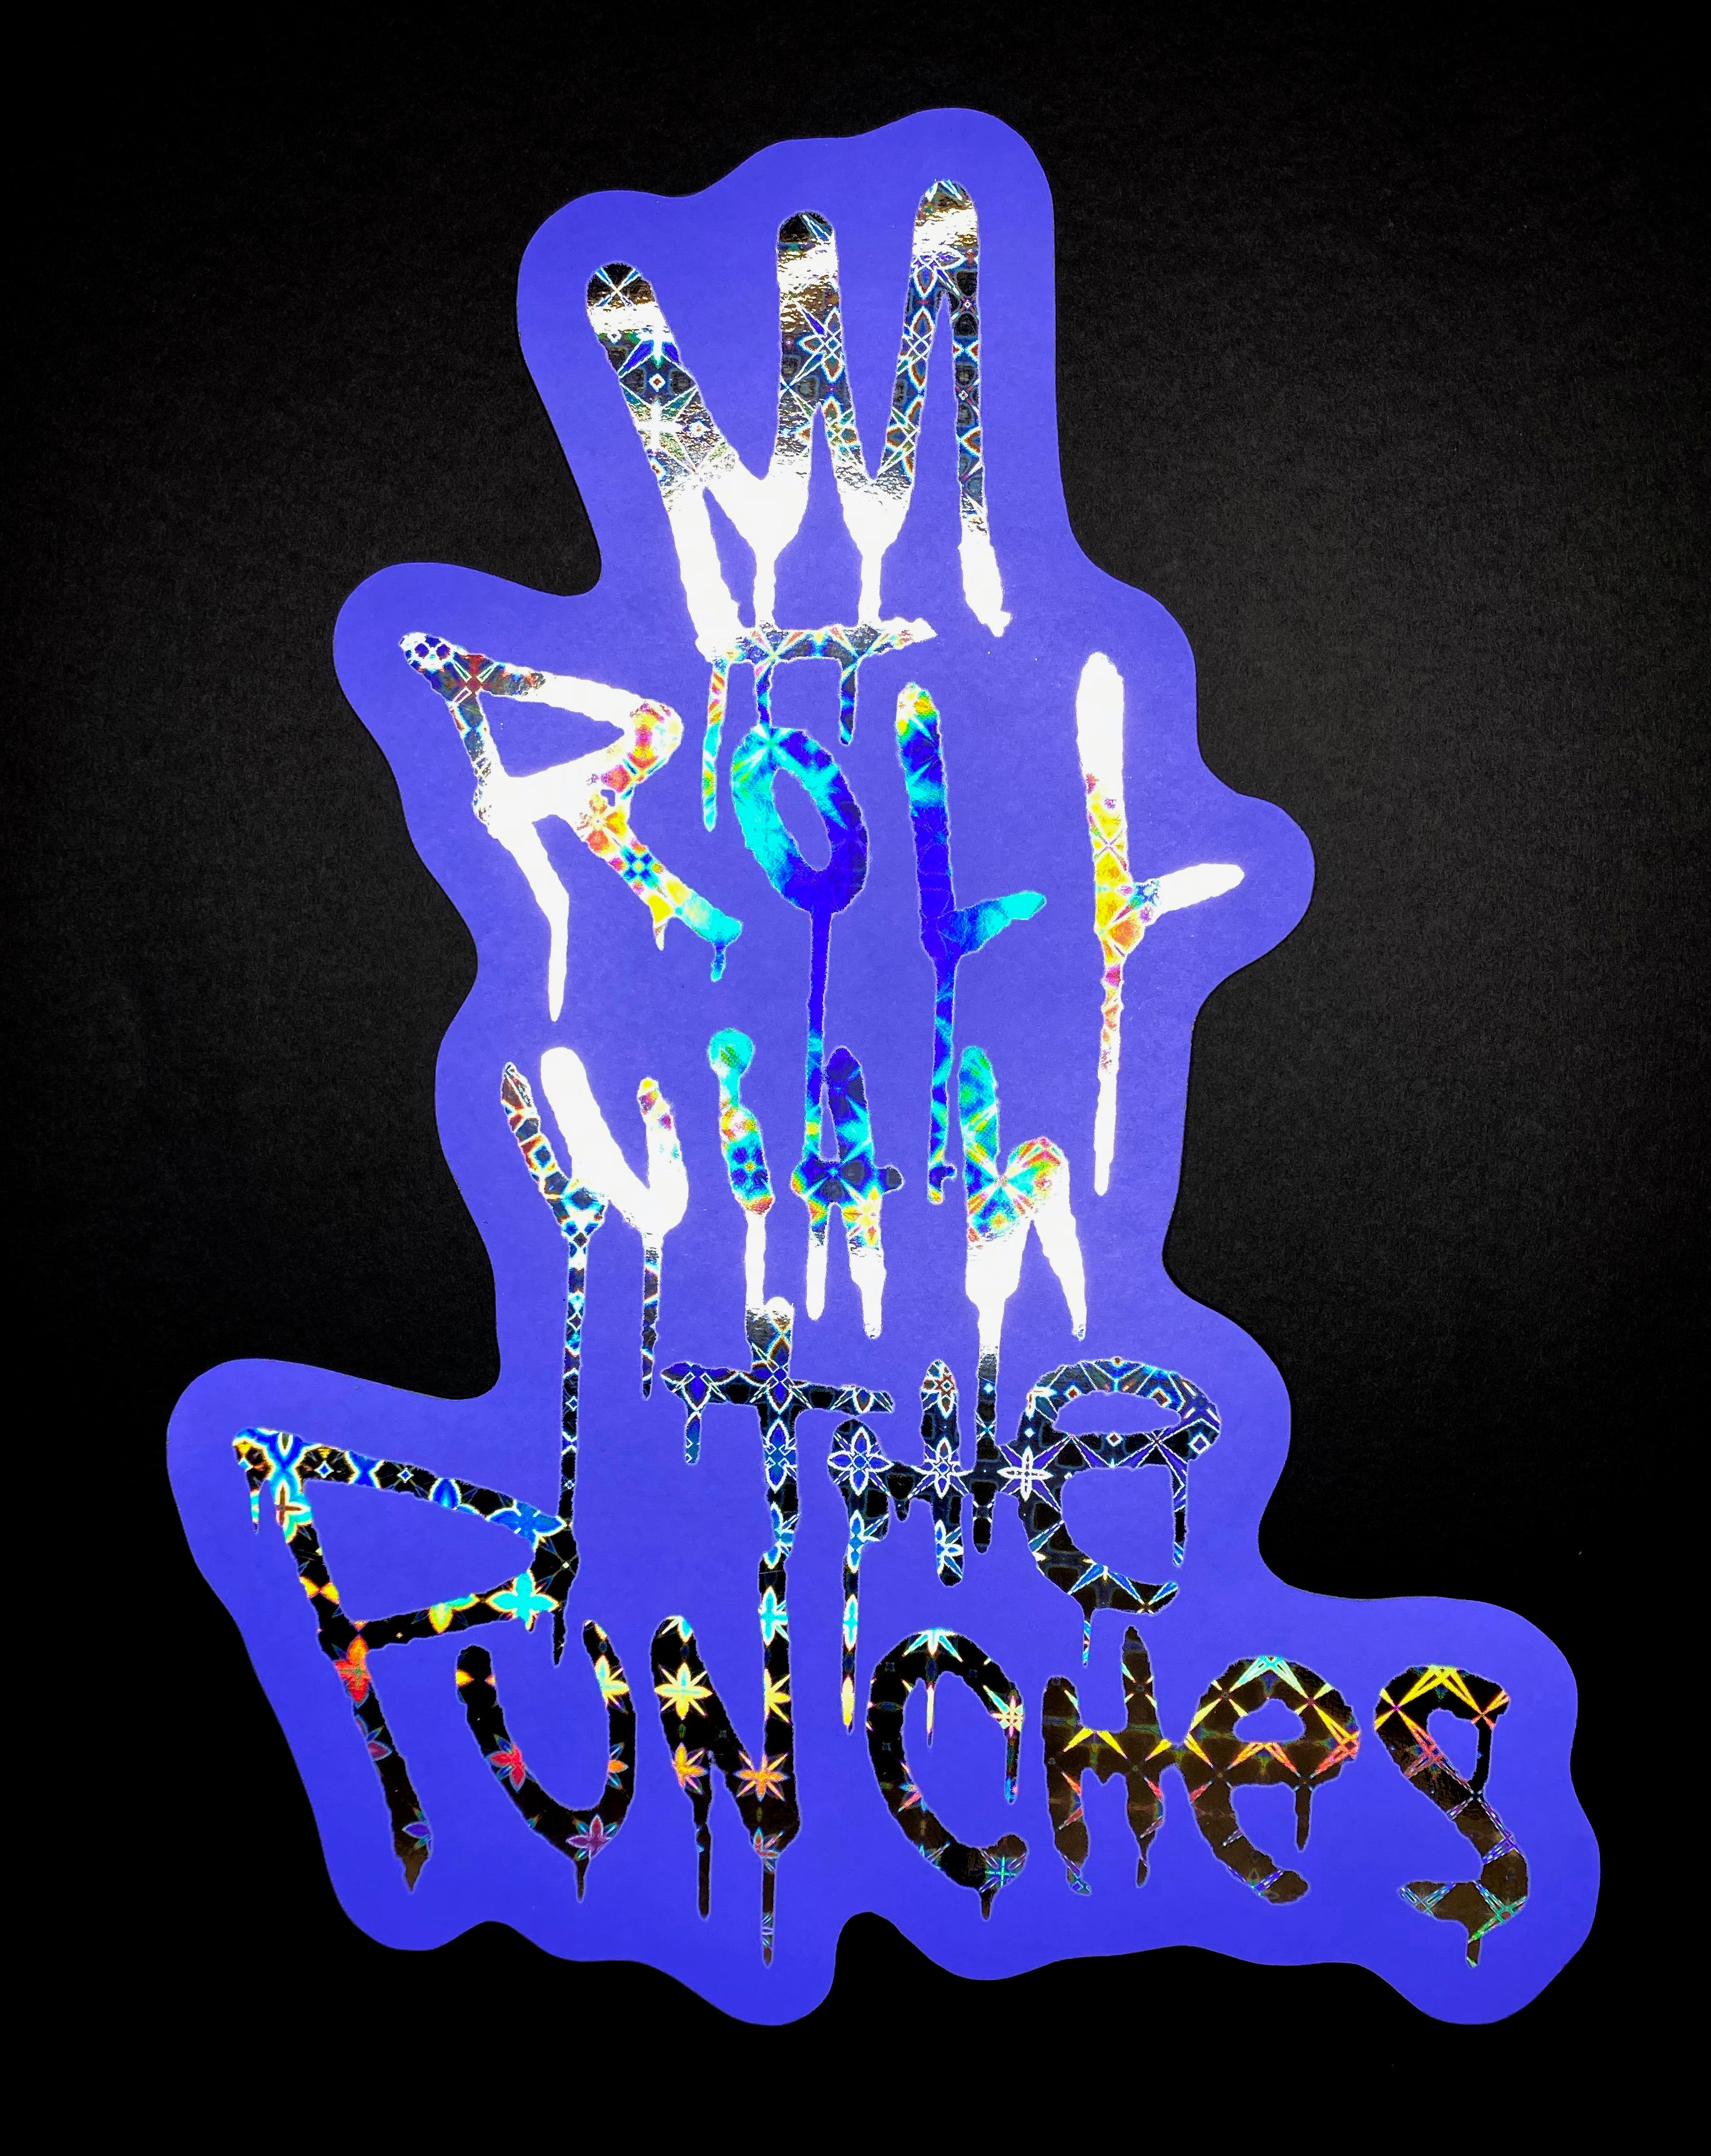 "Roll With the Punches Foil Purple" by JC Rivera